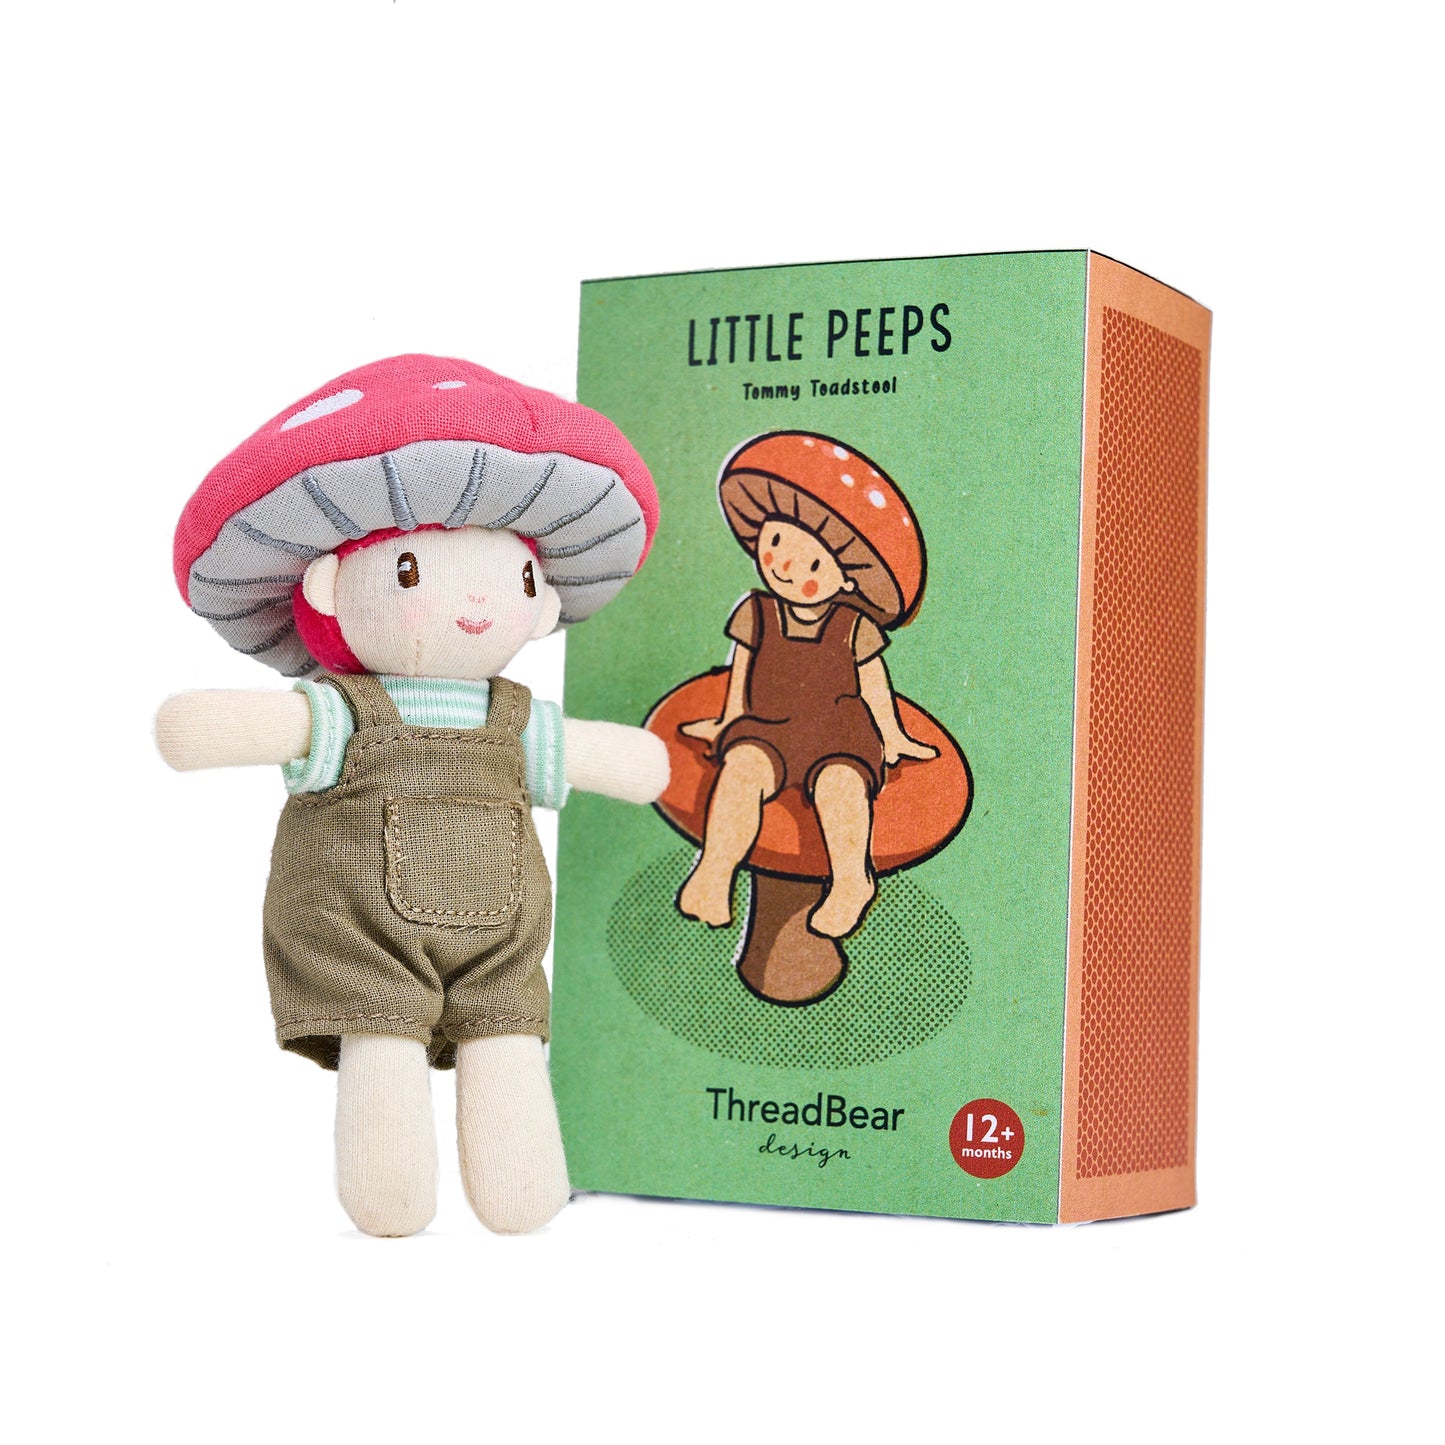 Little Peeps Poppy Stawberry and Tommy Toadstool Bundle